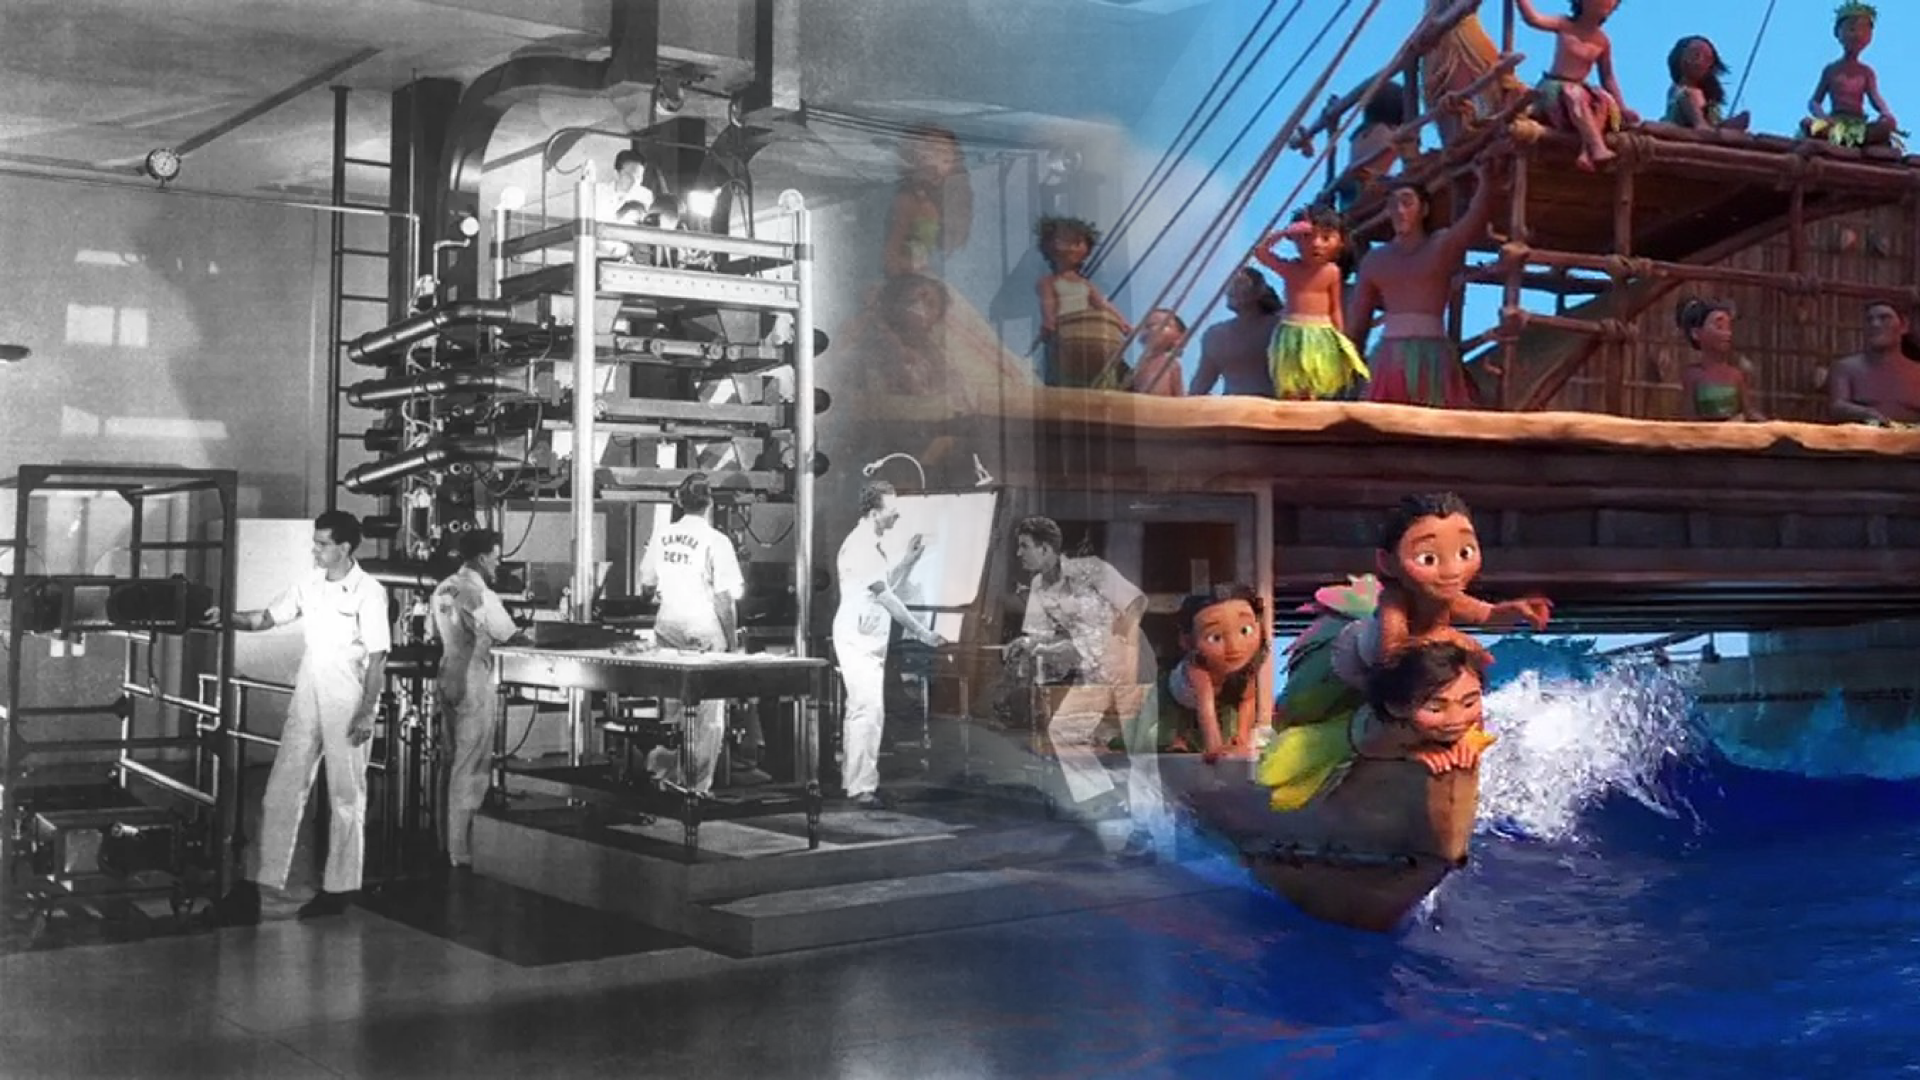 Keynote: Walt Disney Animation Studios and the 100 Year Union of Art and Technology